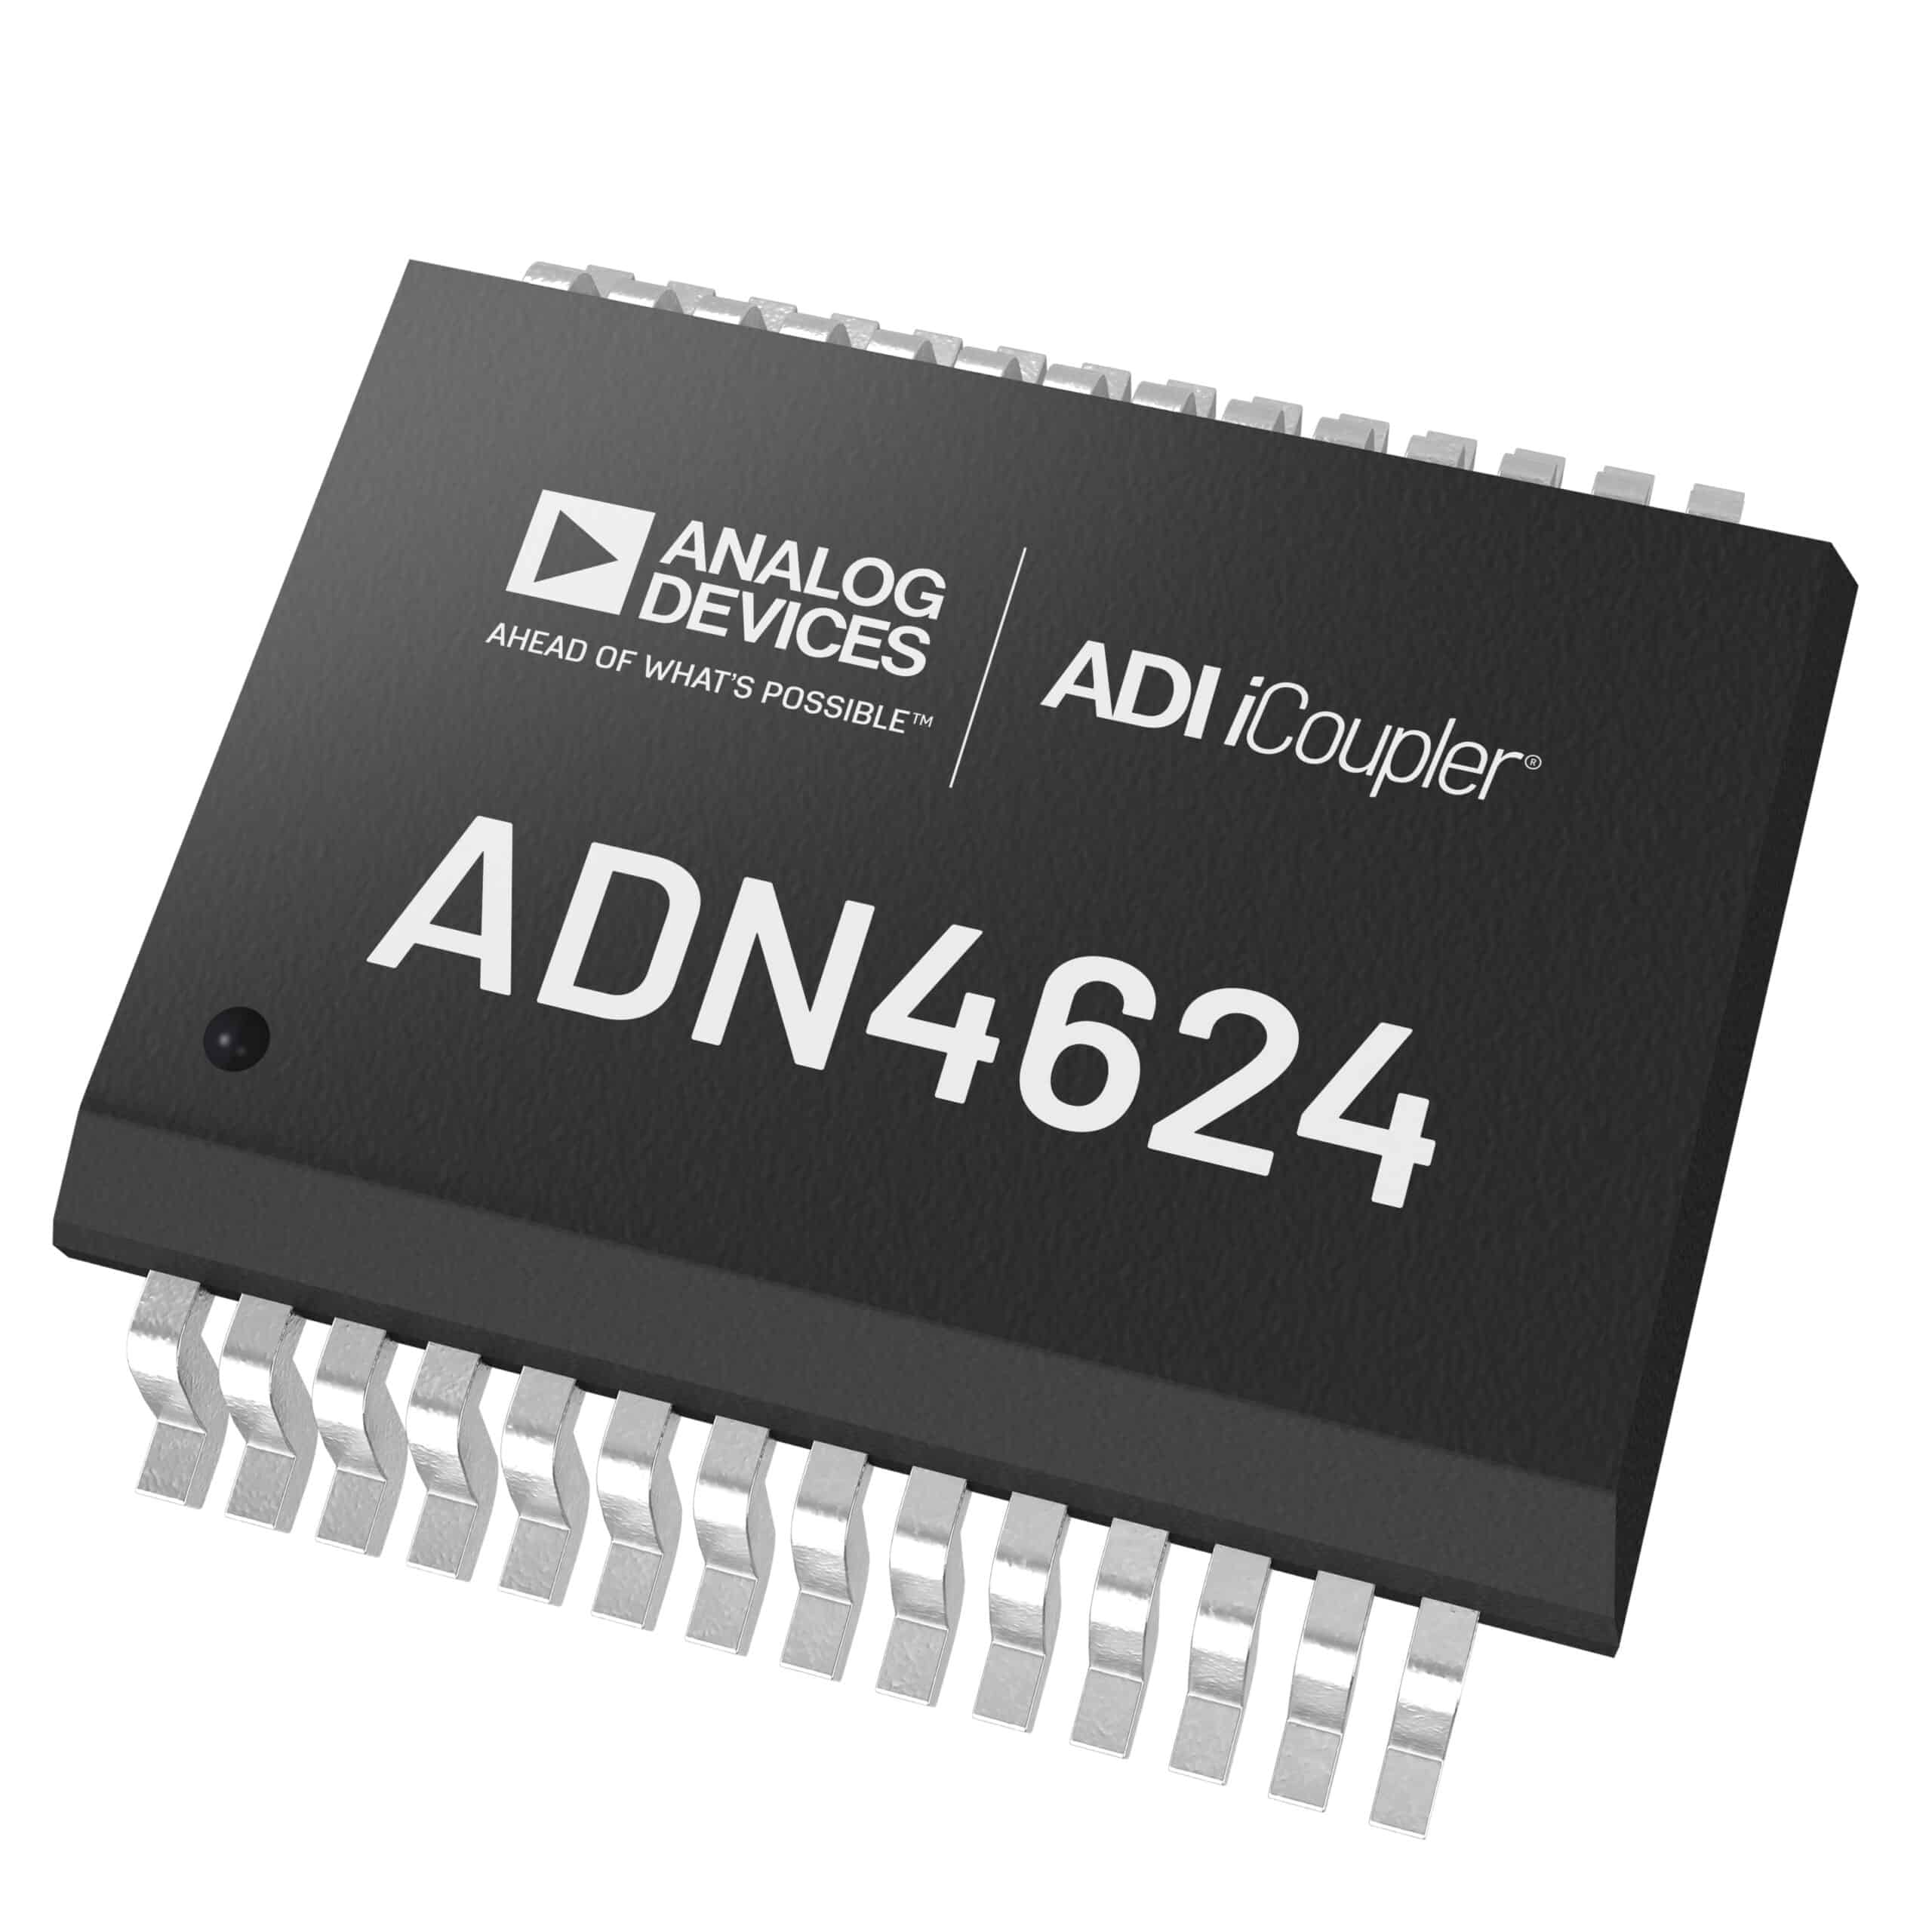 Analog Devices Announces a new 10Gbps Digital Isolator